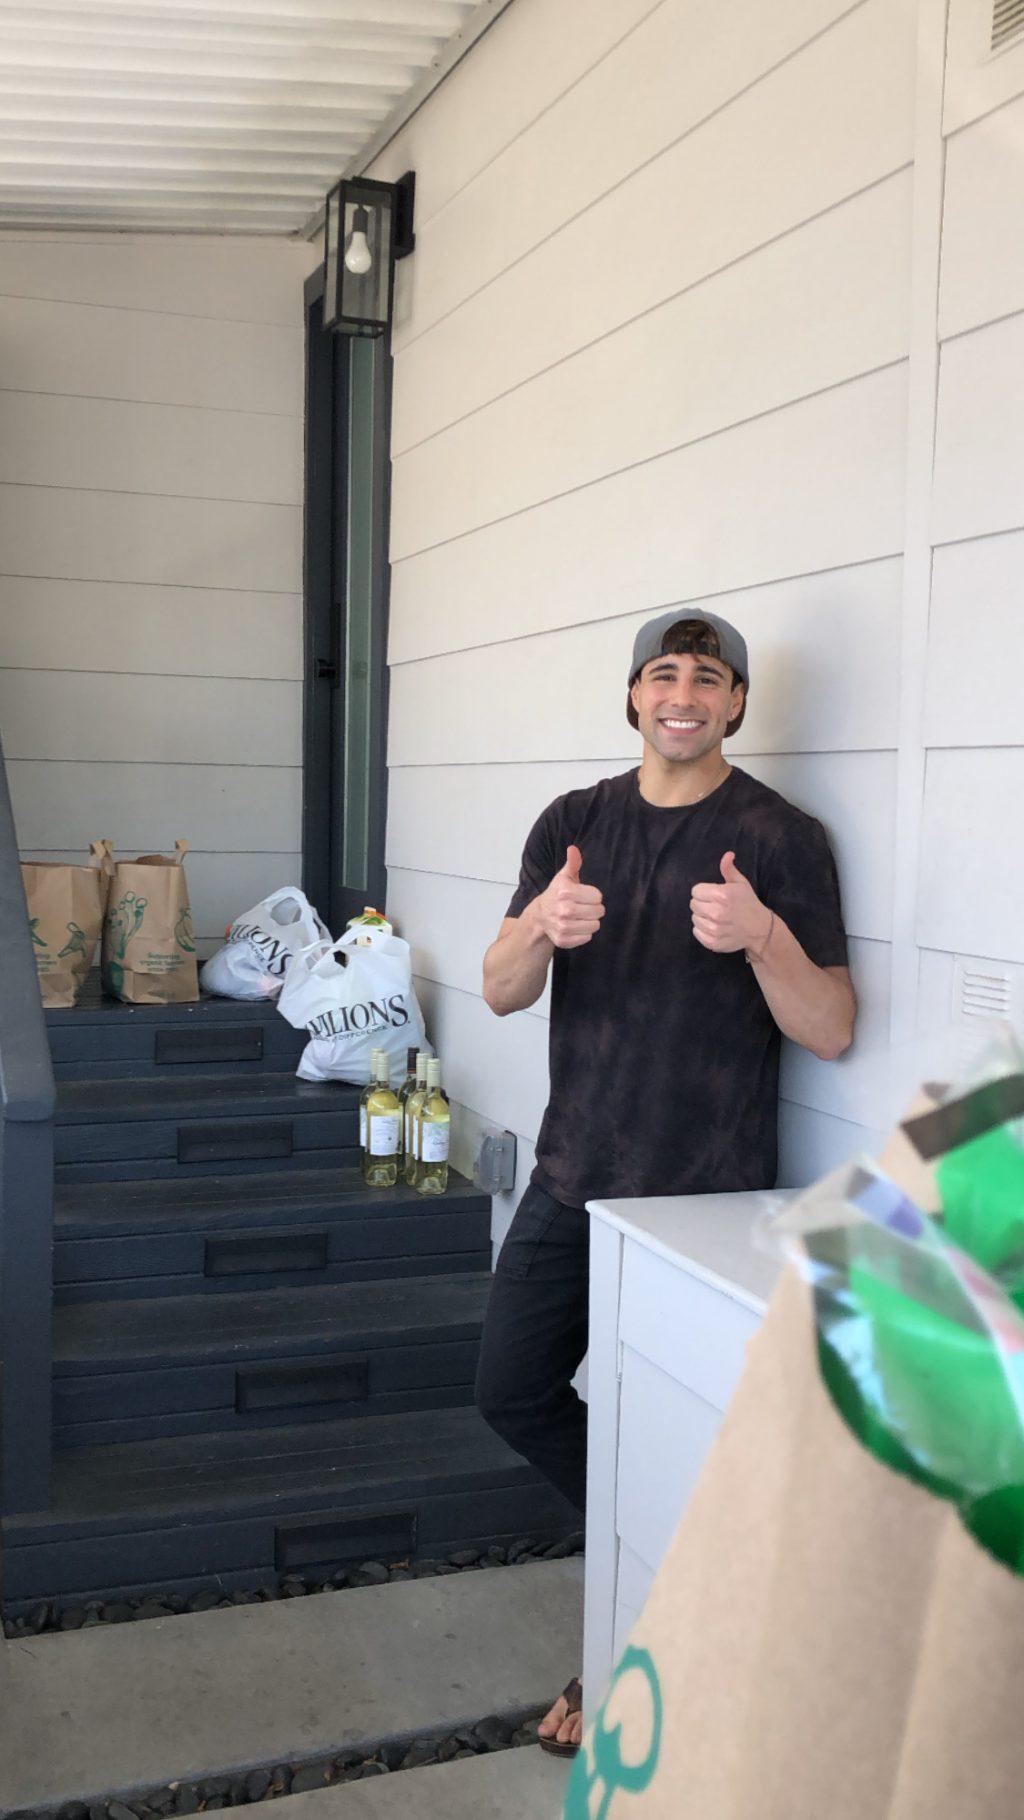 Zeke Bongiovanni delivers four bags of groceries from Whole Foods and Pavillions to his client's front steps March 21.